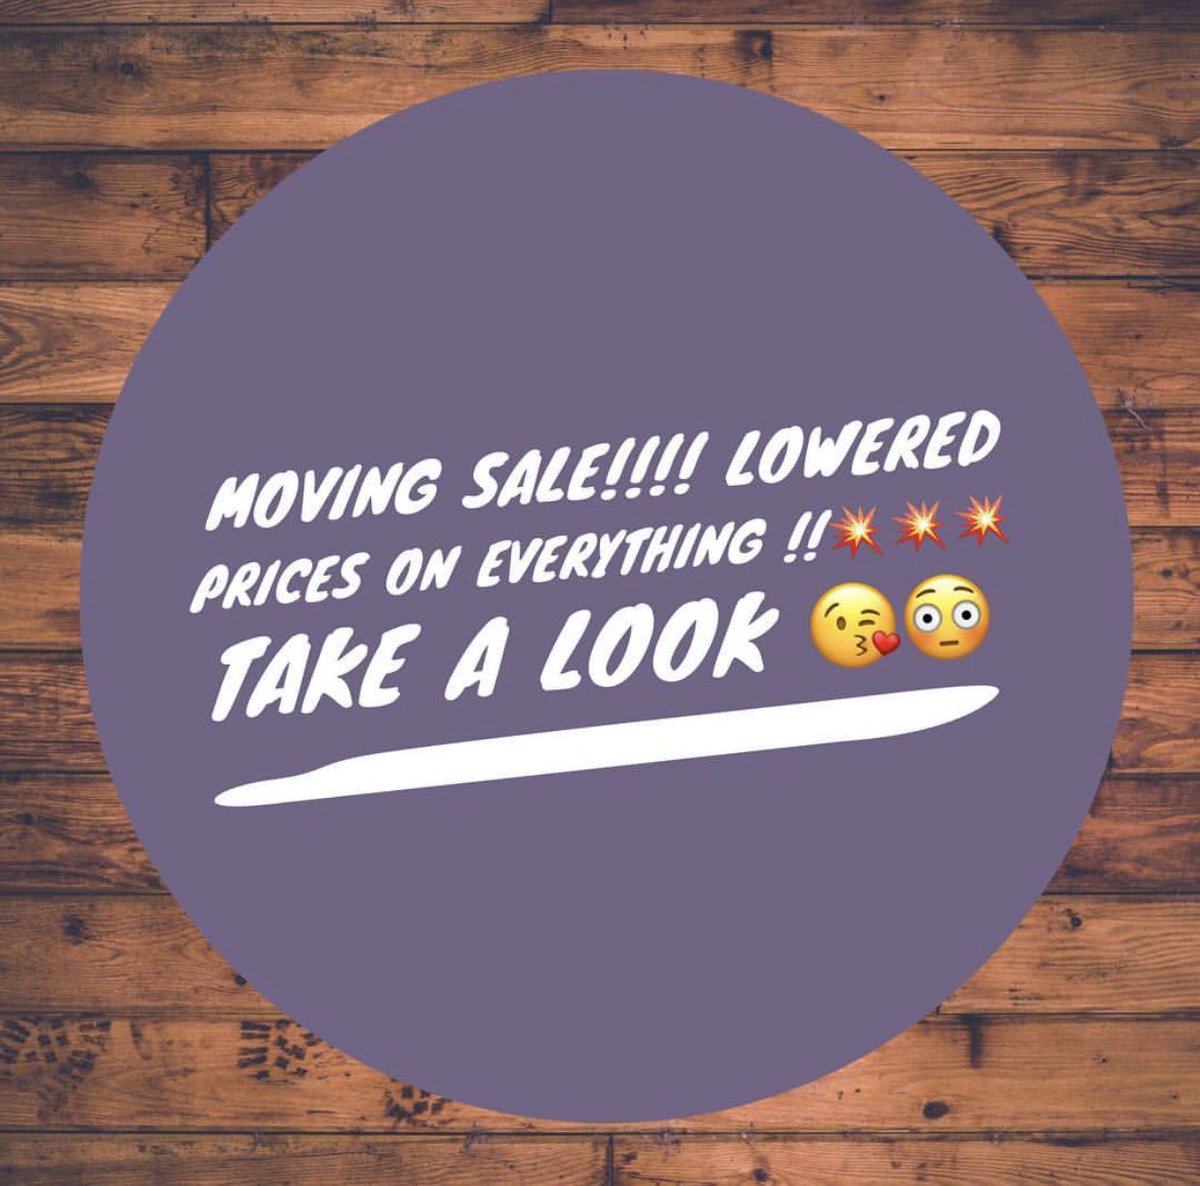 Moving local but would like to travel light!!! Great deals!!!. Follow link to poshmark, eBay or vintage on Etsy💥💥💥
.
#hugesale #style #ebay  #recycledfashion #clothes #deals #shoppingonline #shop #greatfinds #vintage #etsy #ebayfashion #ebayfinds #sustainablefashion